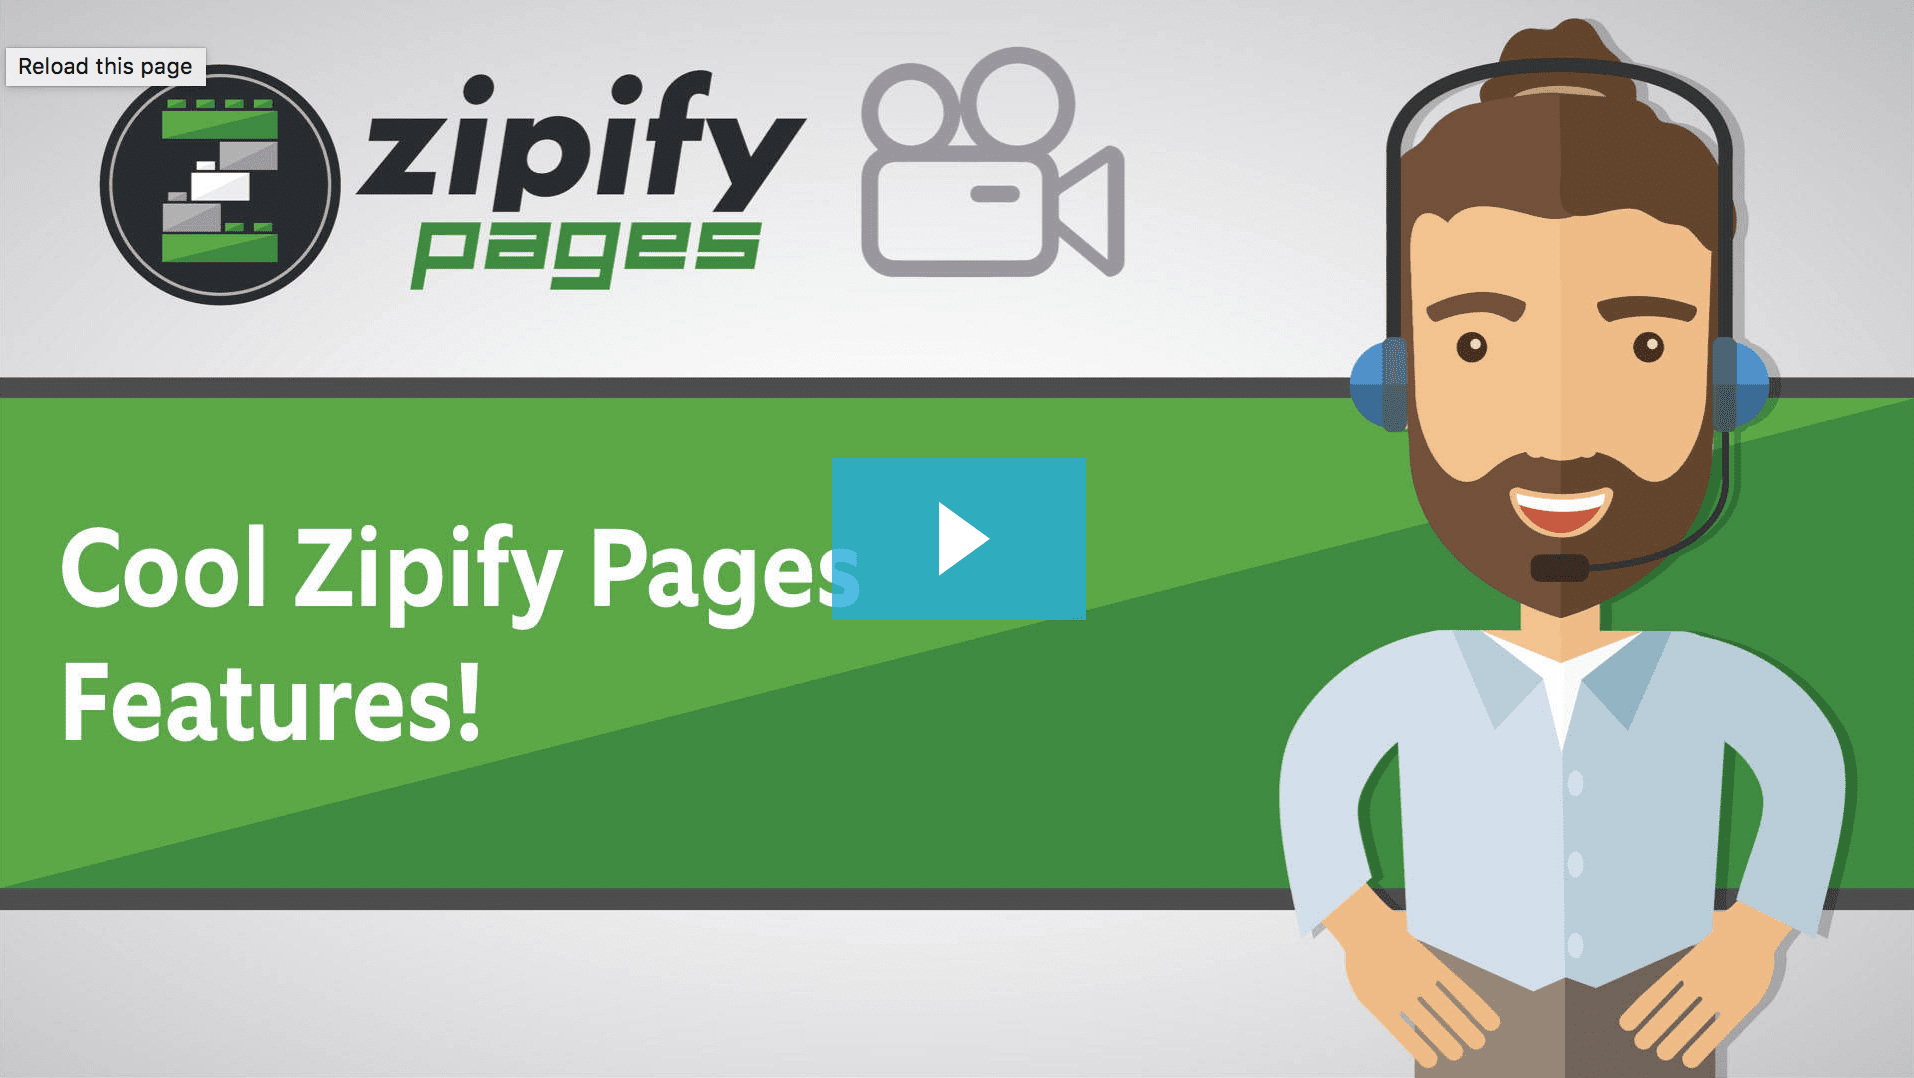 Cool Zipify pages features